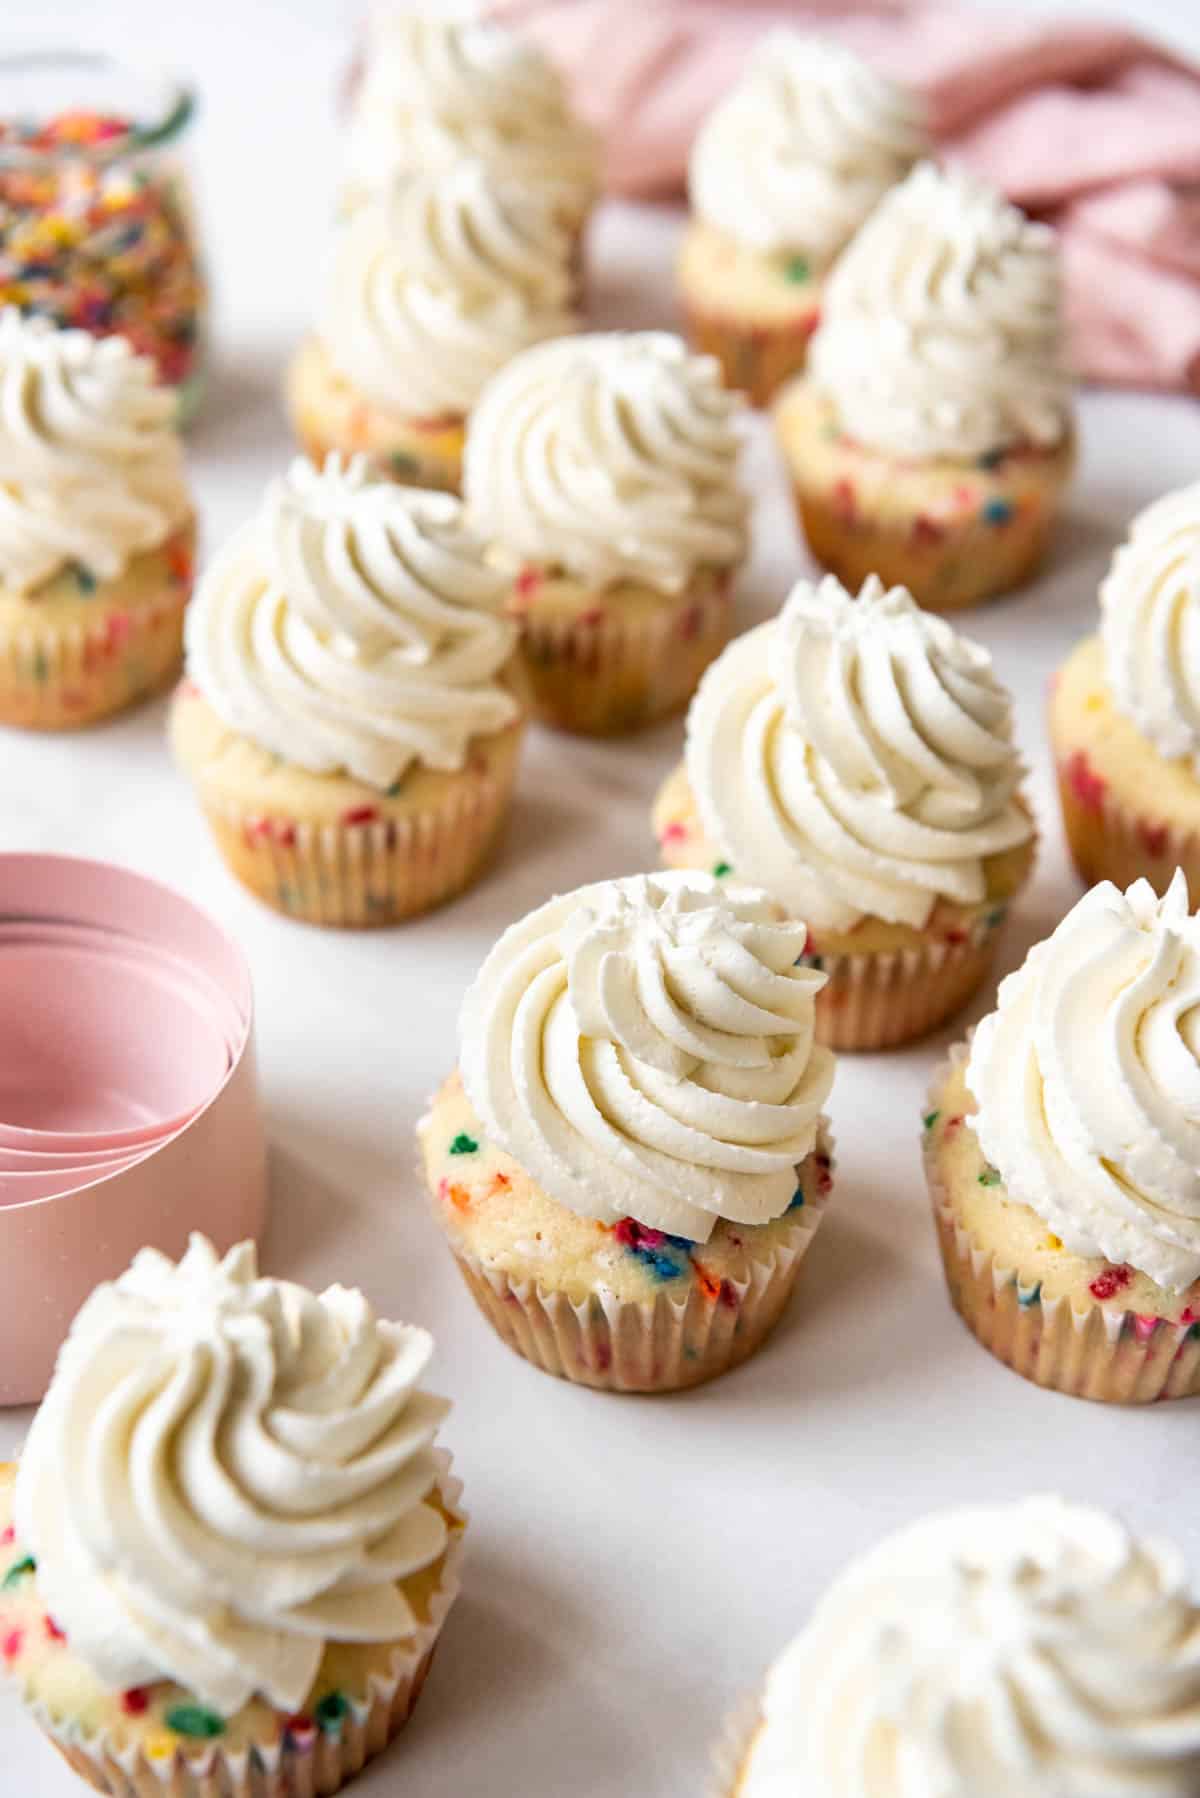 Funfetti cupcakes decorated with Swiss meringue buttercream frosting.